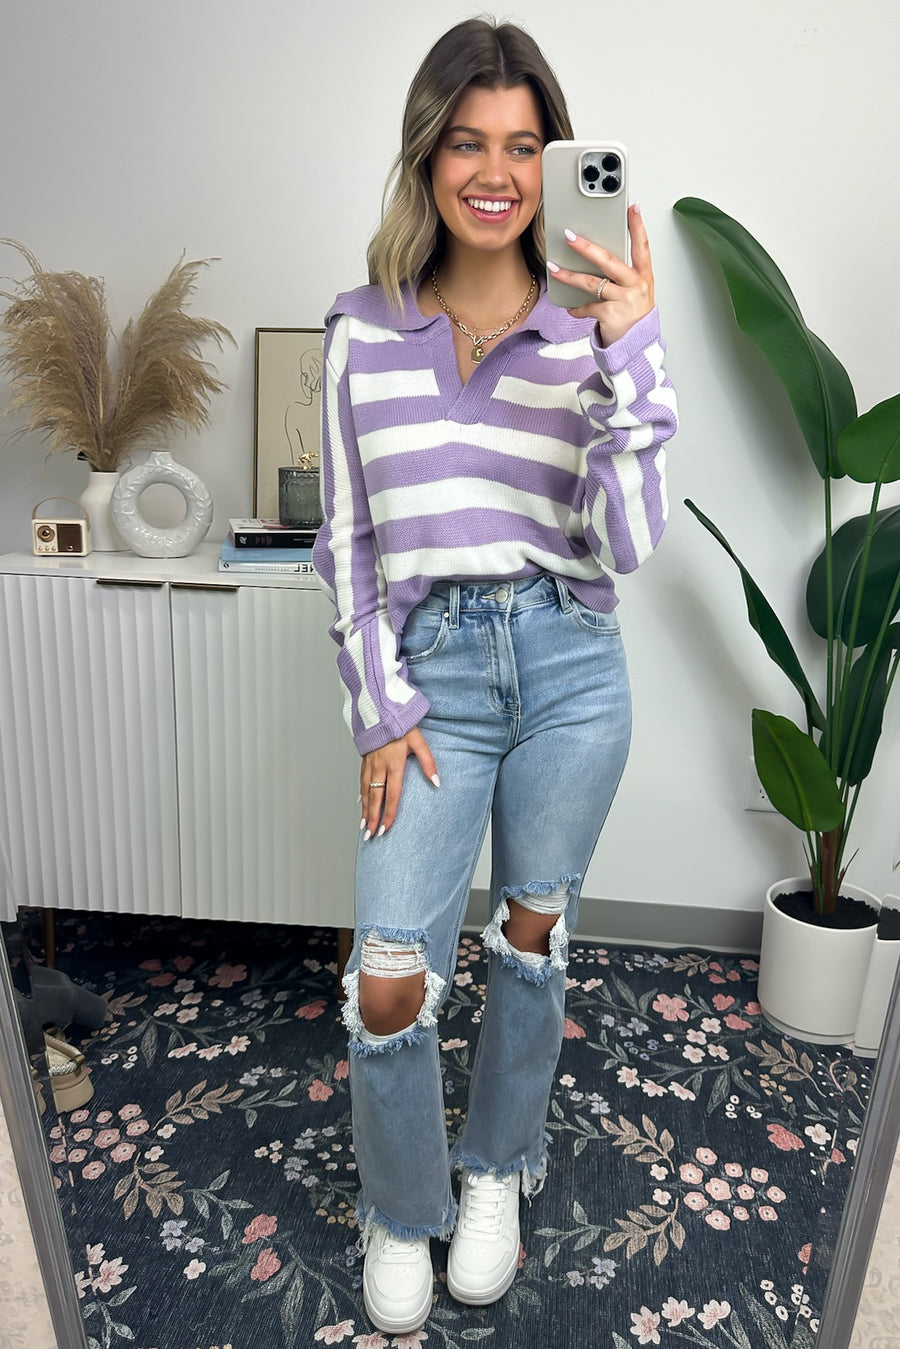  Tarynne Polo Stripe Sweater - Madison and Mallory